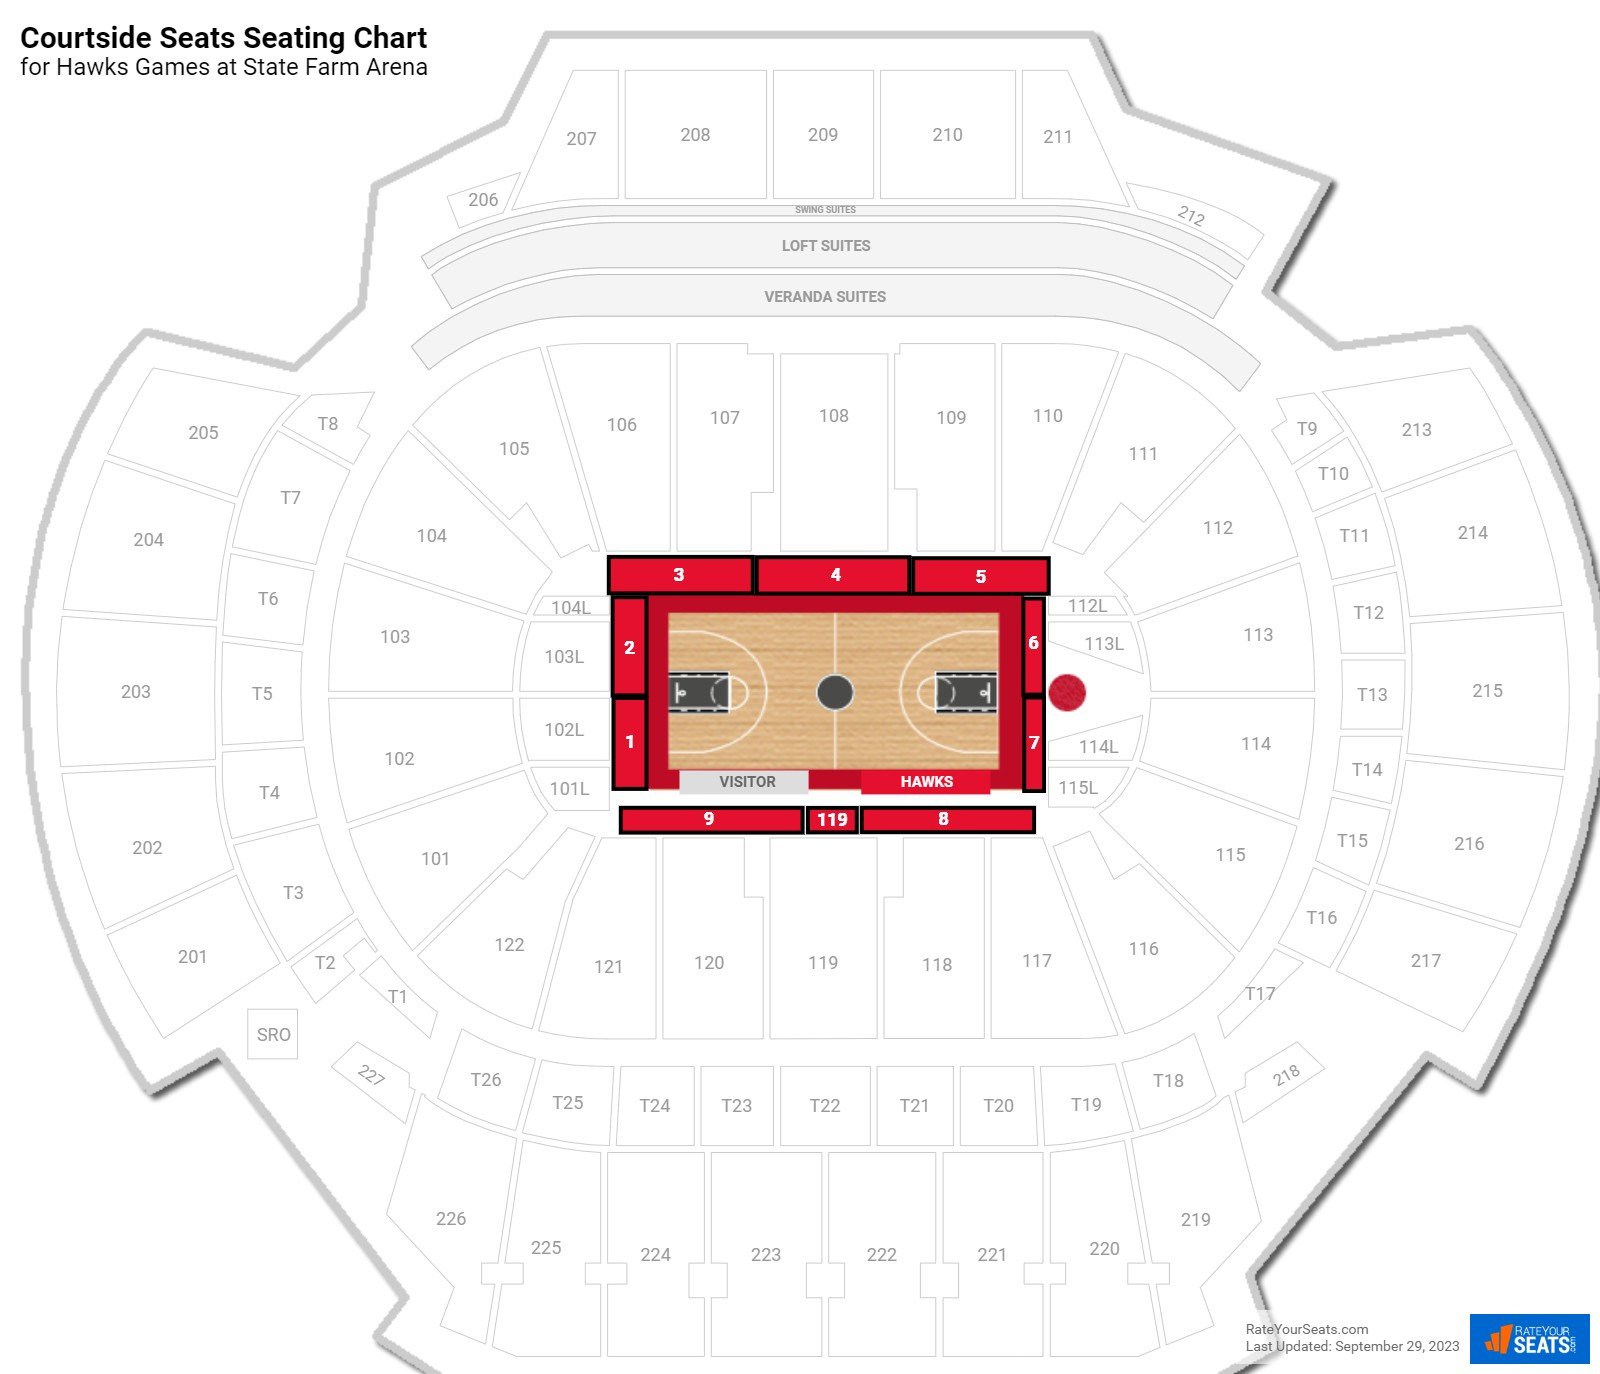 Hawks Courtside Seats Seating Chart at State Farm Arena